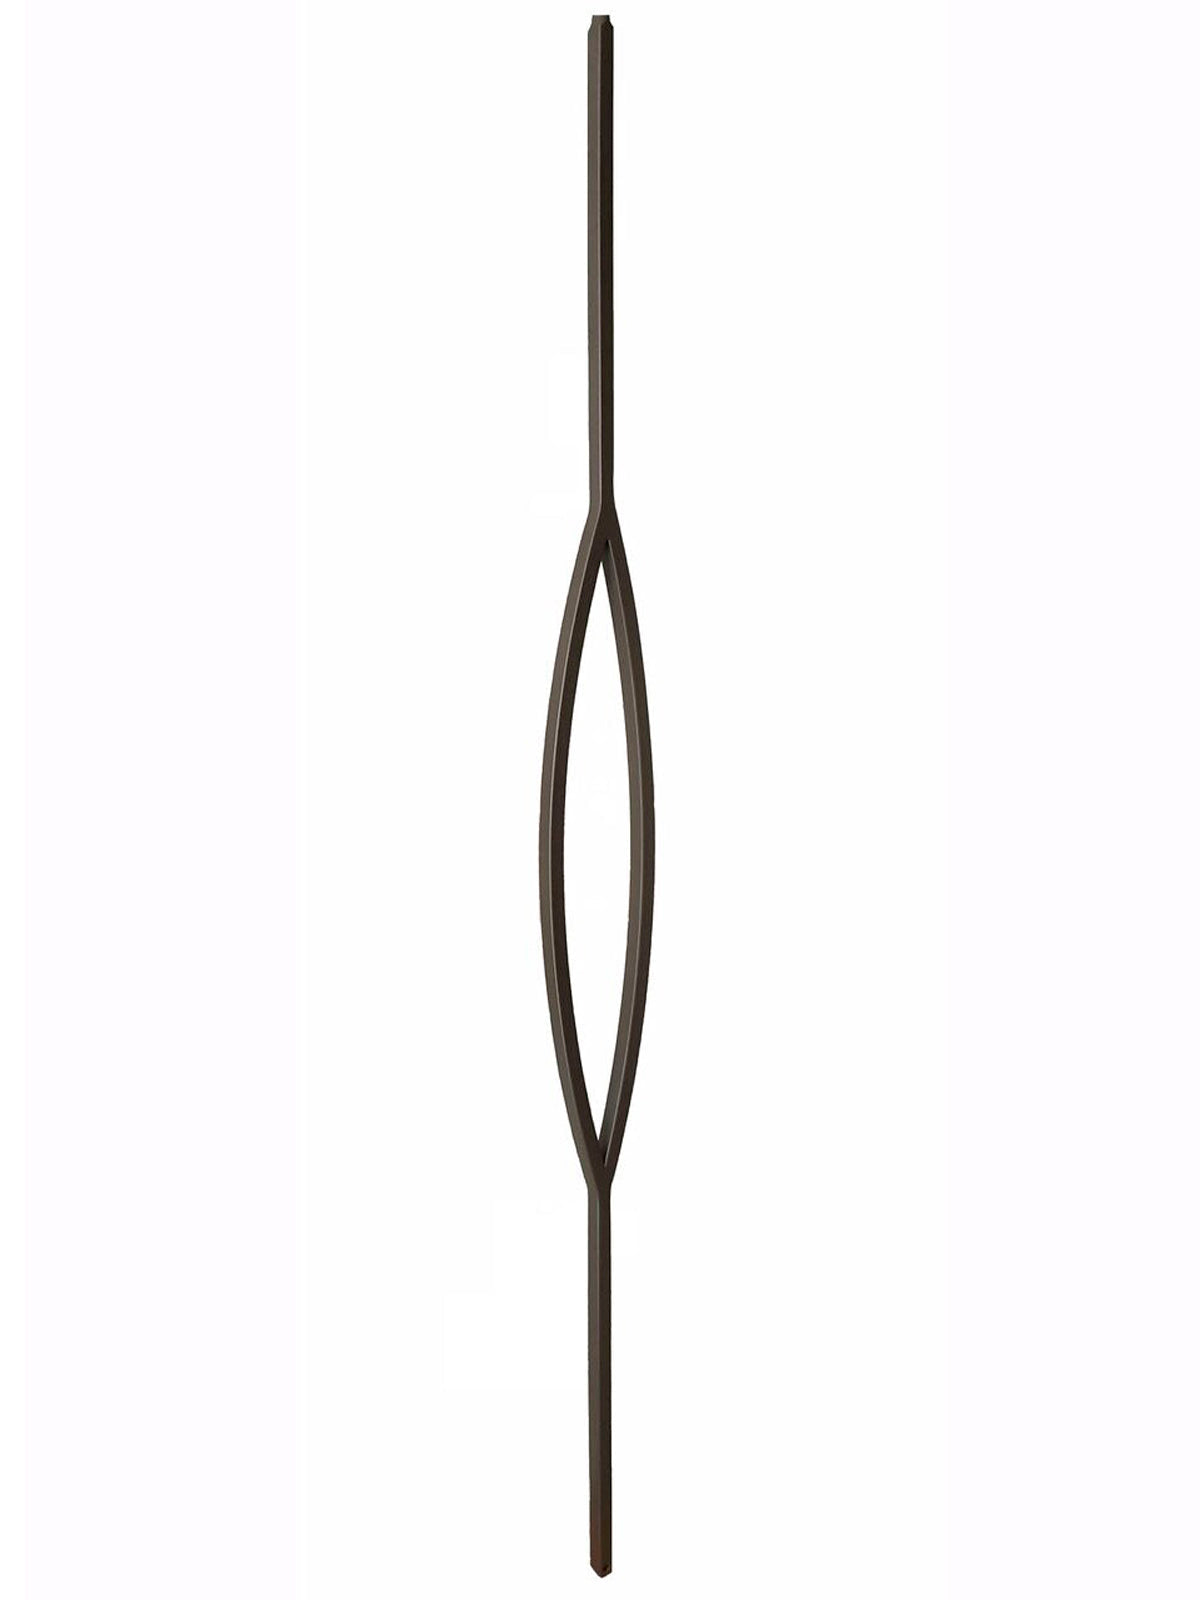 Iron Baluster 9093 - 1/2" Square - Pointed Oval